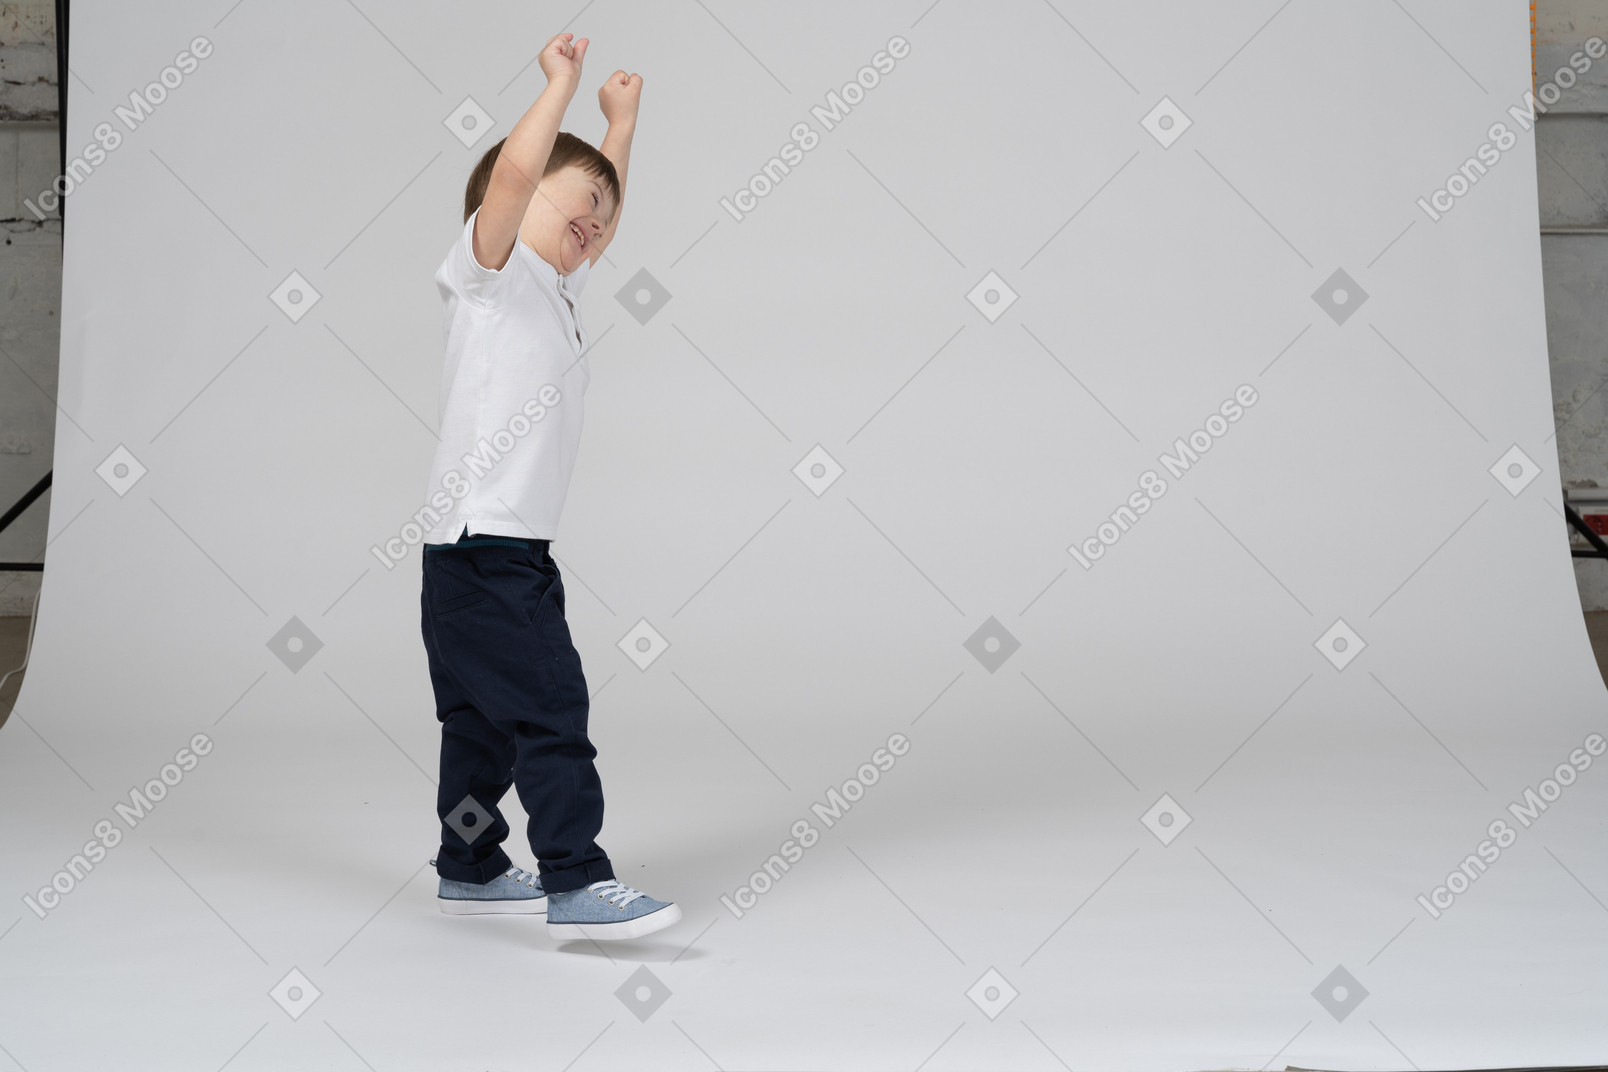 Little boy celebrating with his arms raised